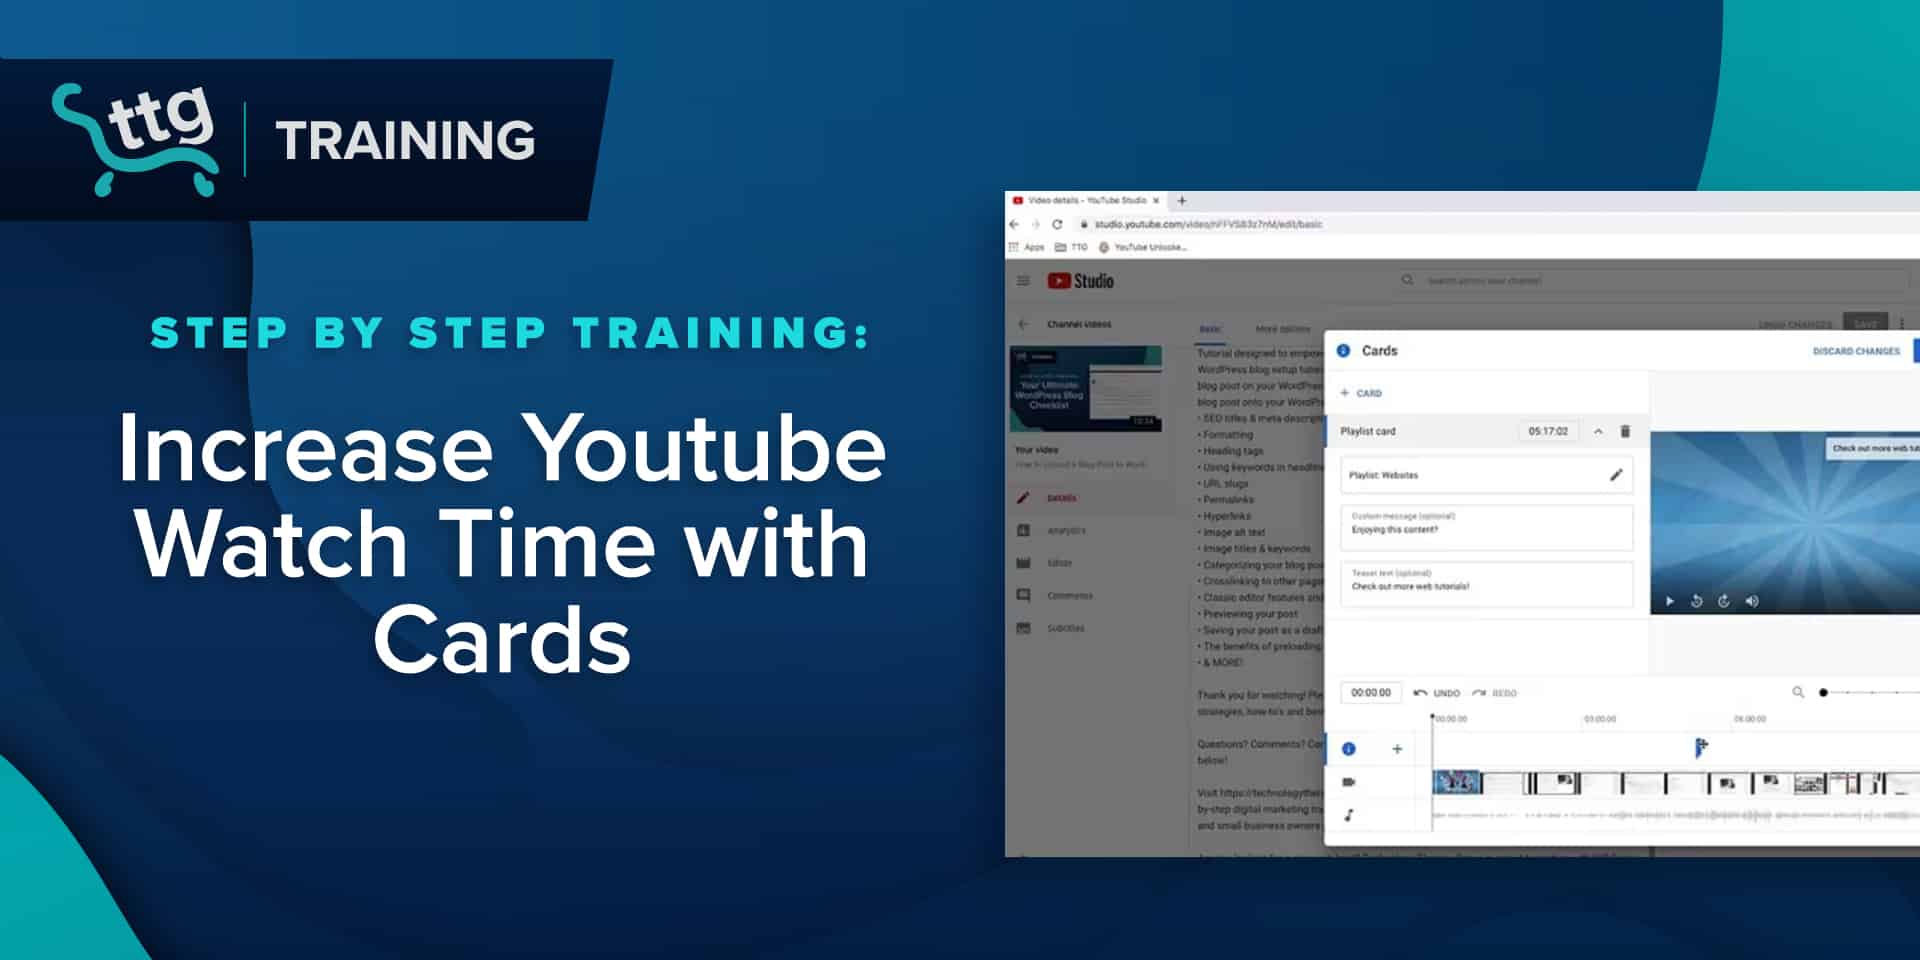 How to Add Cards to YouTube Videos